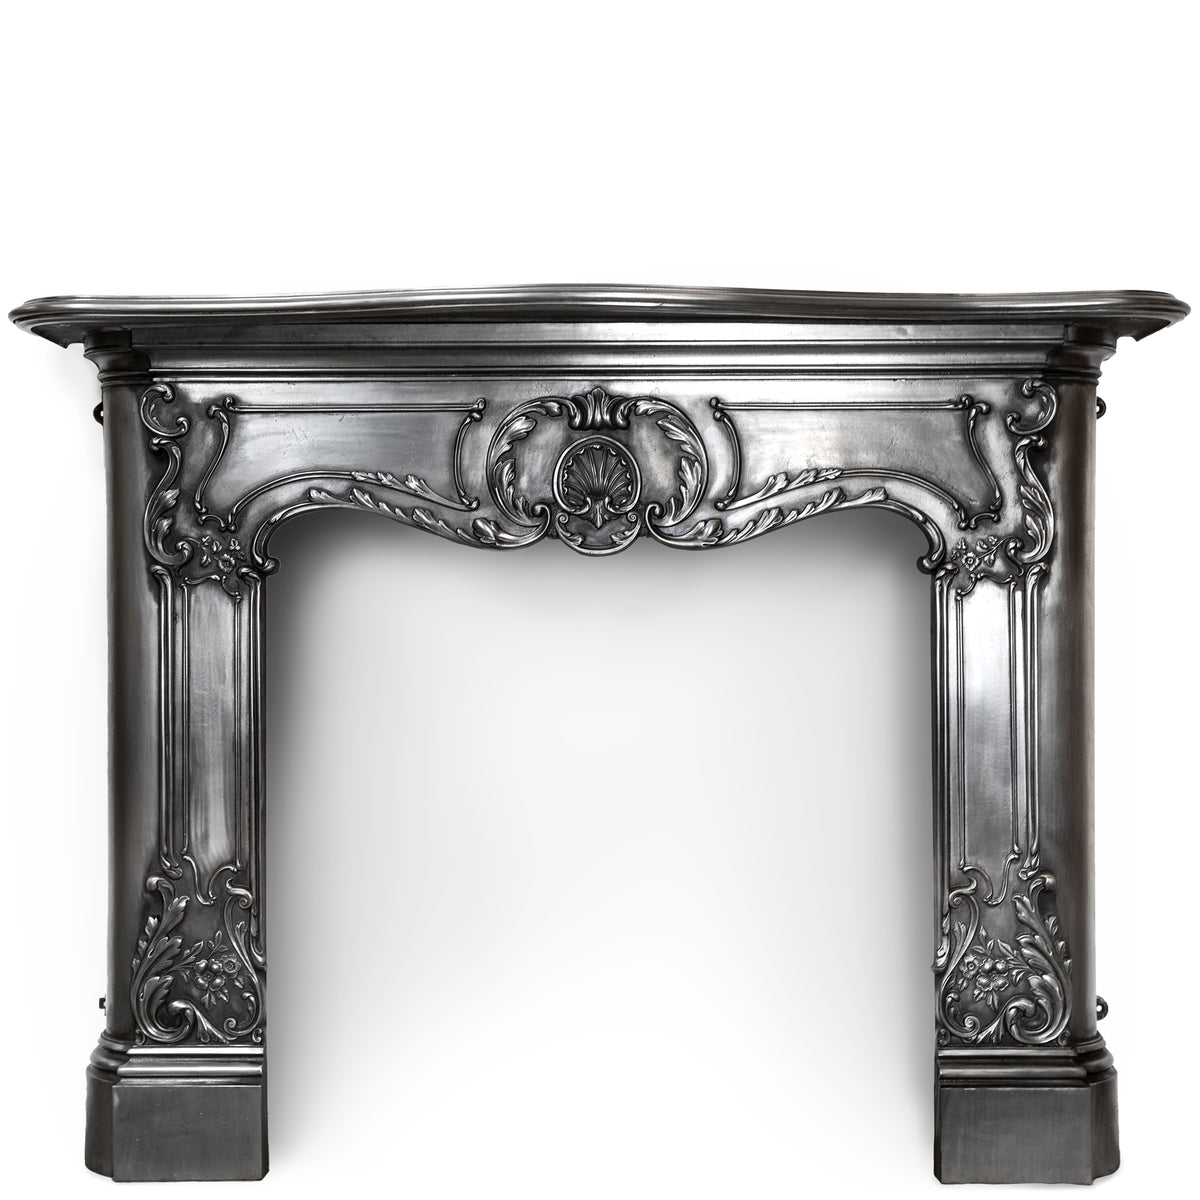 Antique Victorian Rococo Style Ornate Polished Cast Iron Fireplace Surround | The Architectural Forum